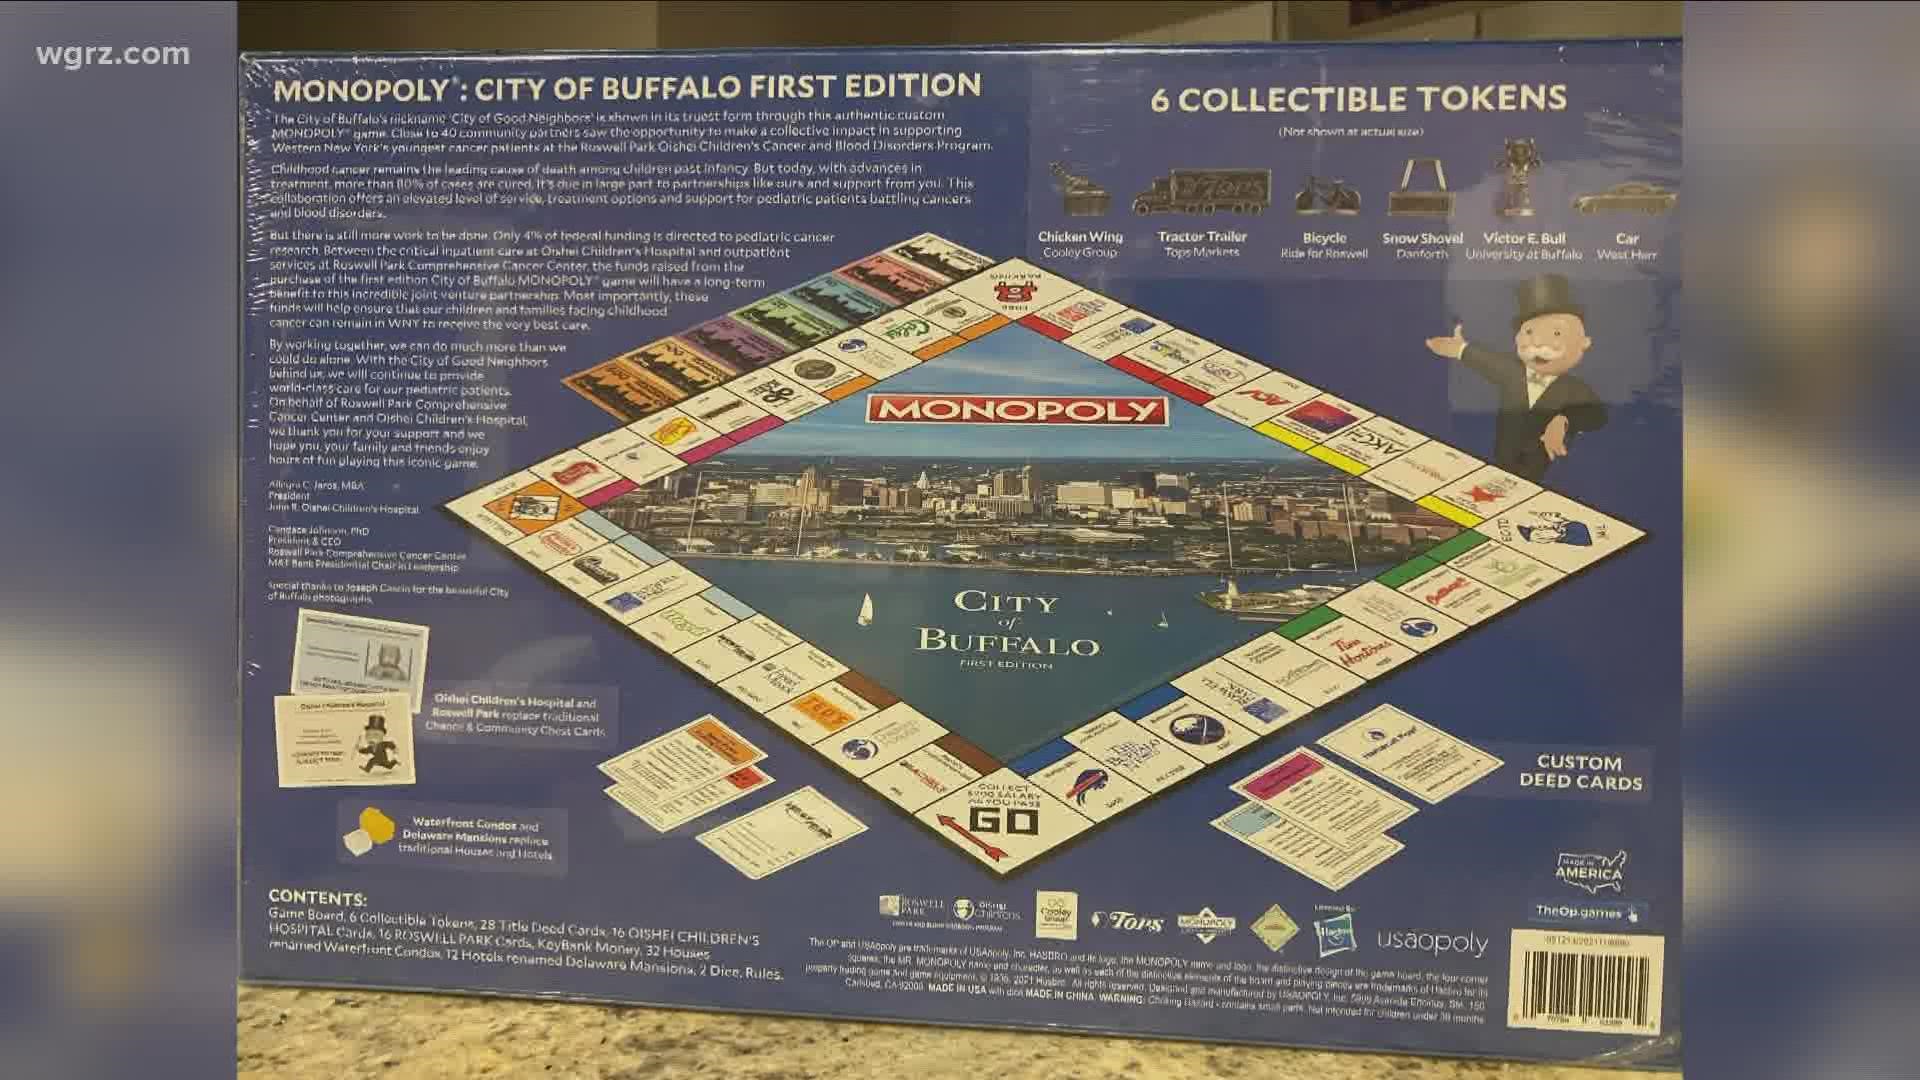 Roswell Park and Oishei Children’s Hospital teamed up with Hasbro to create the First Edition City of Buffalo Monopoly game.